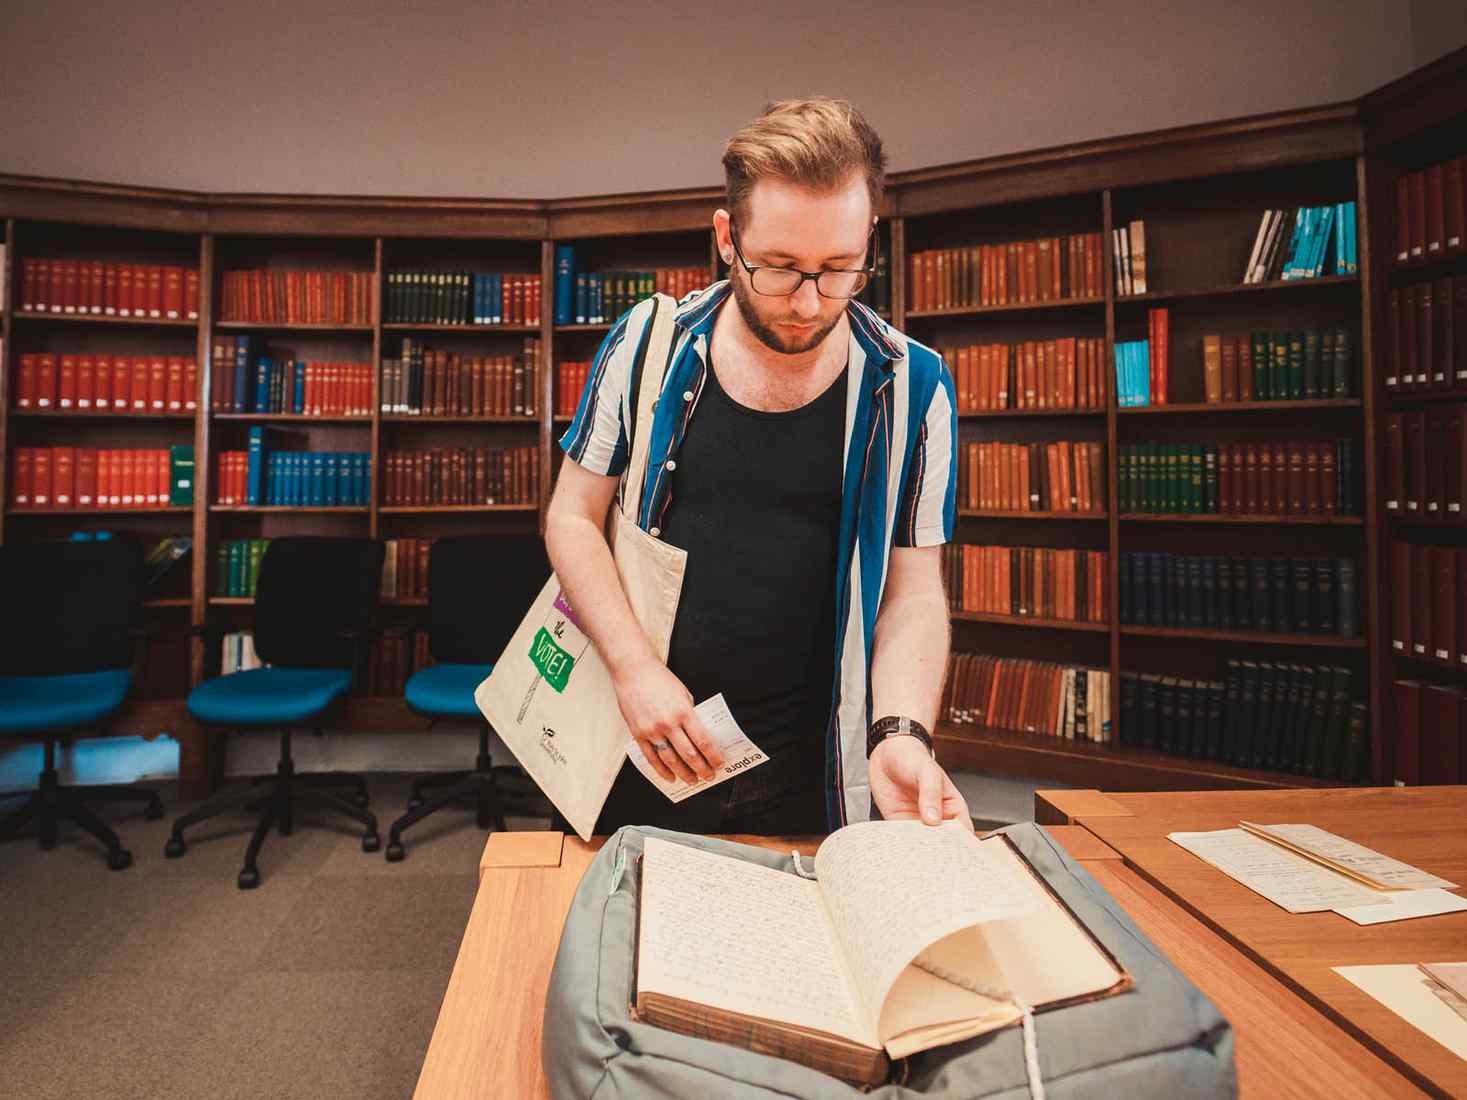 Student looking at historic book in library 